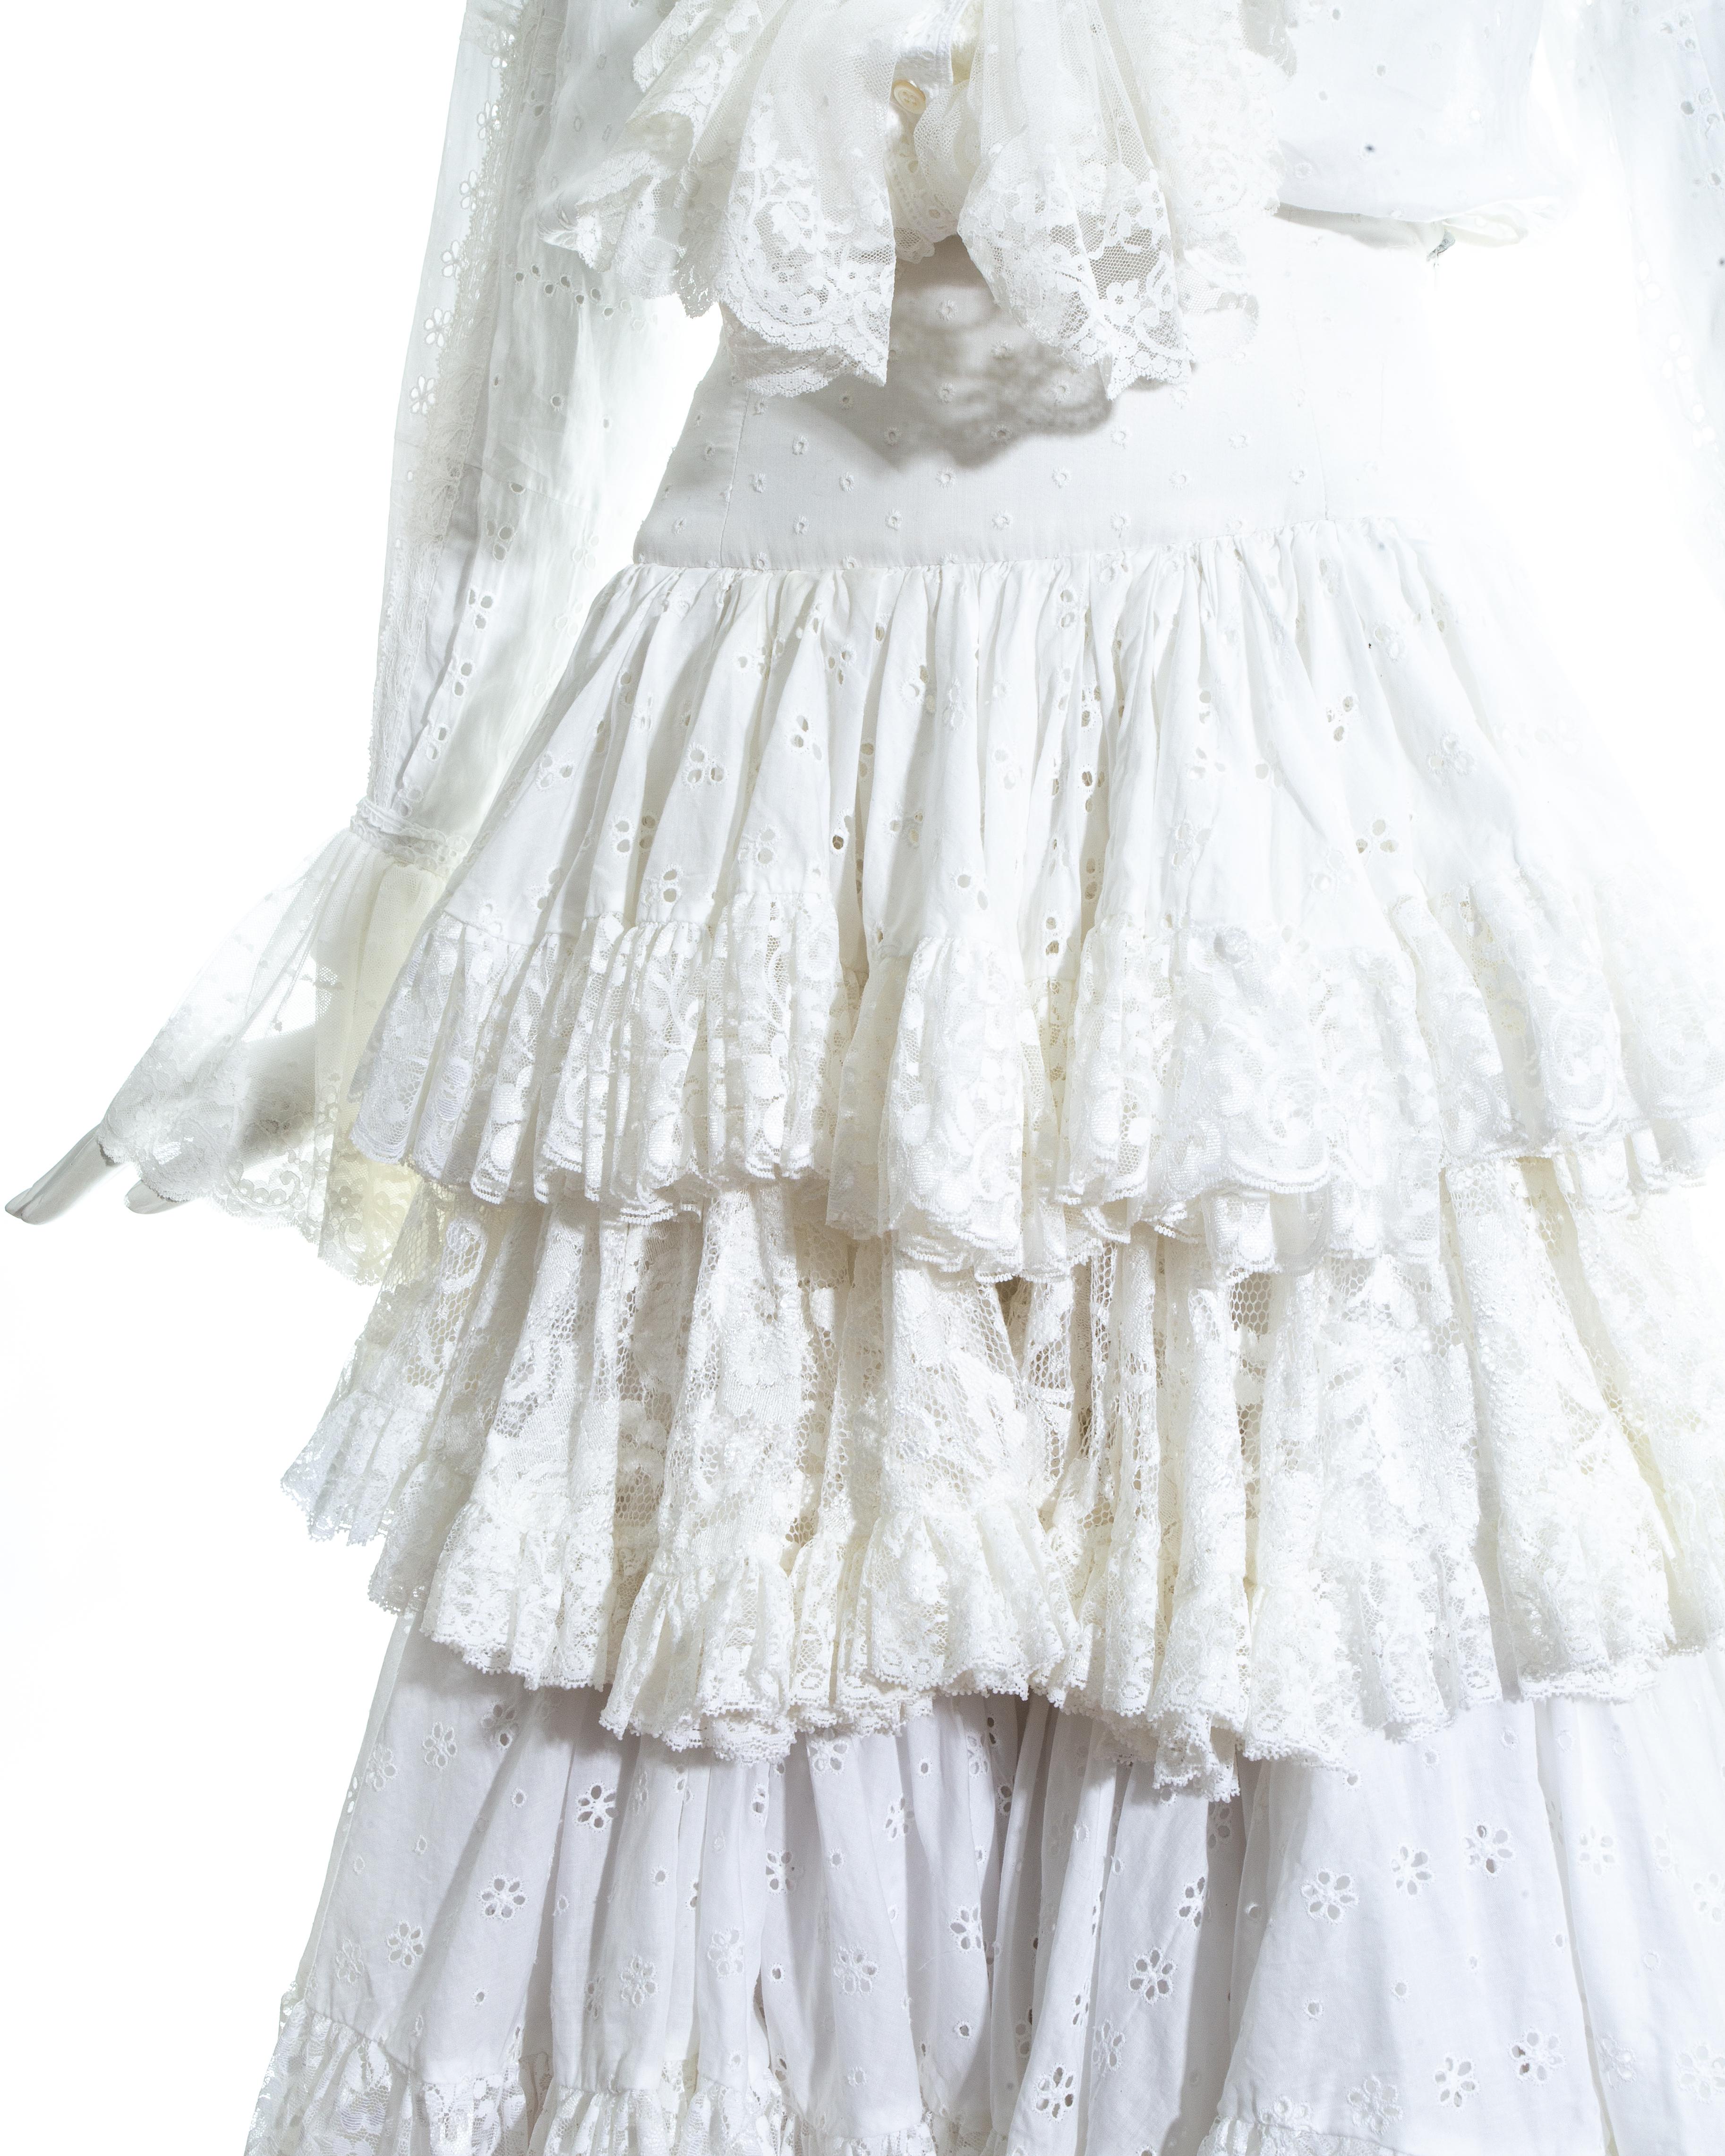 Women's Dolce & Gabbana white broderie anglaise and lace skirt and blouse, ss 1993 For Sale